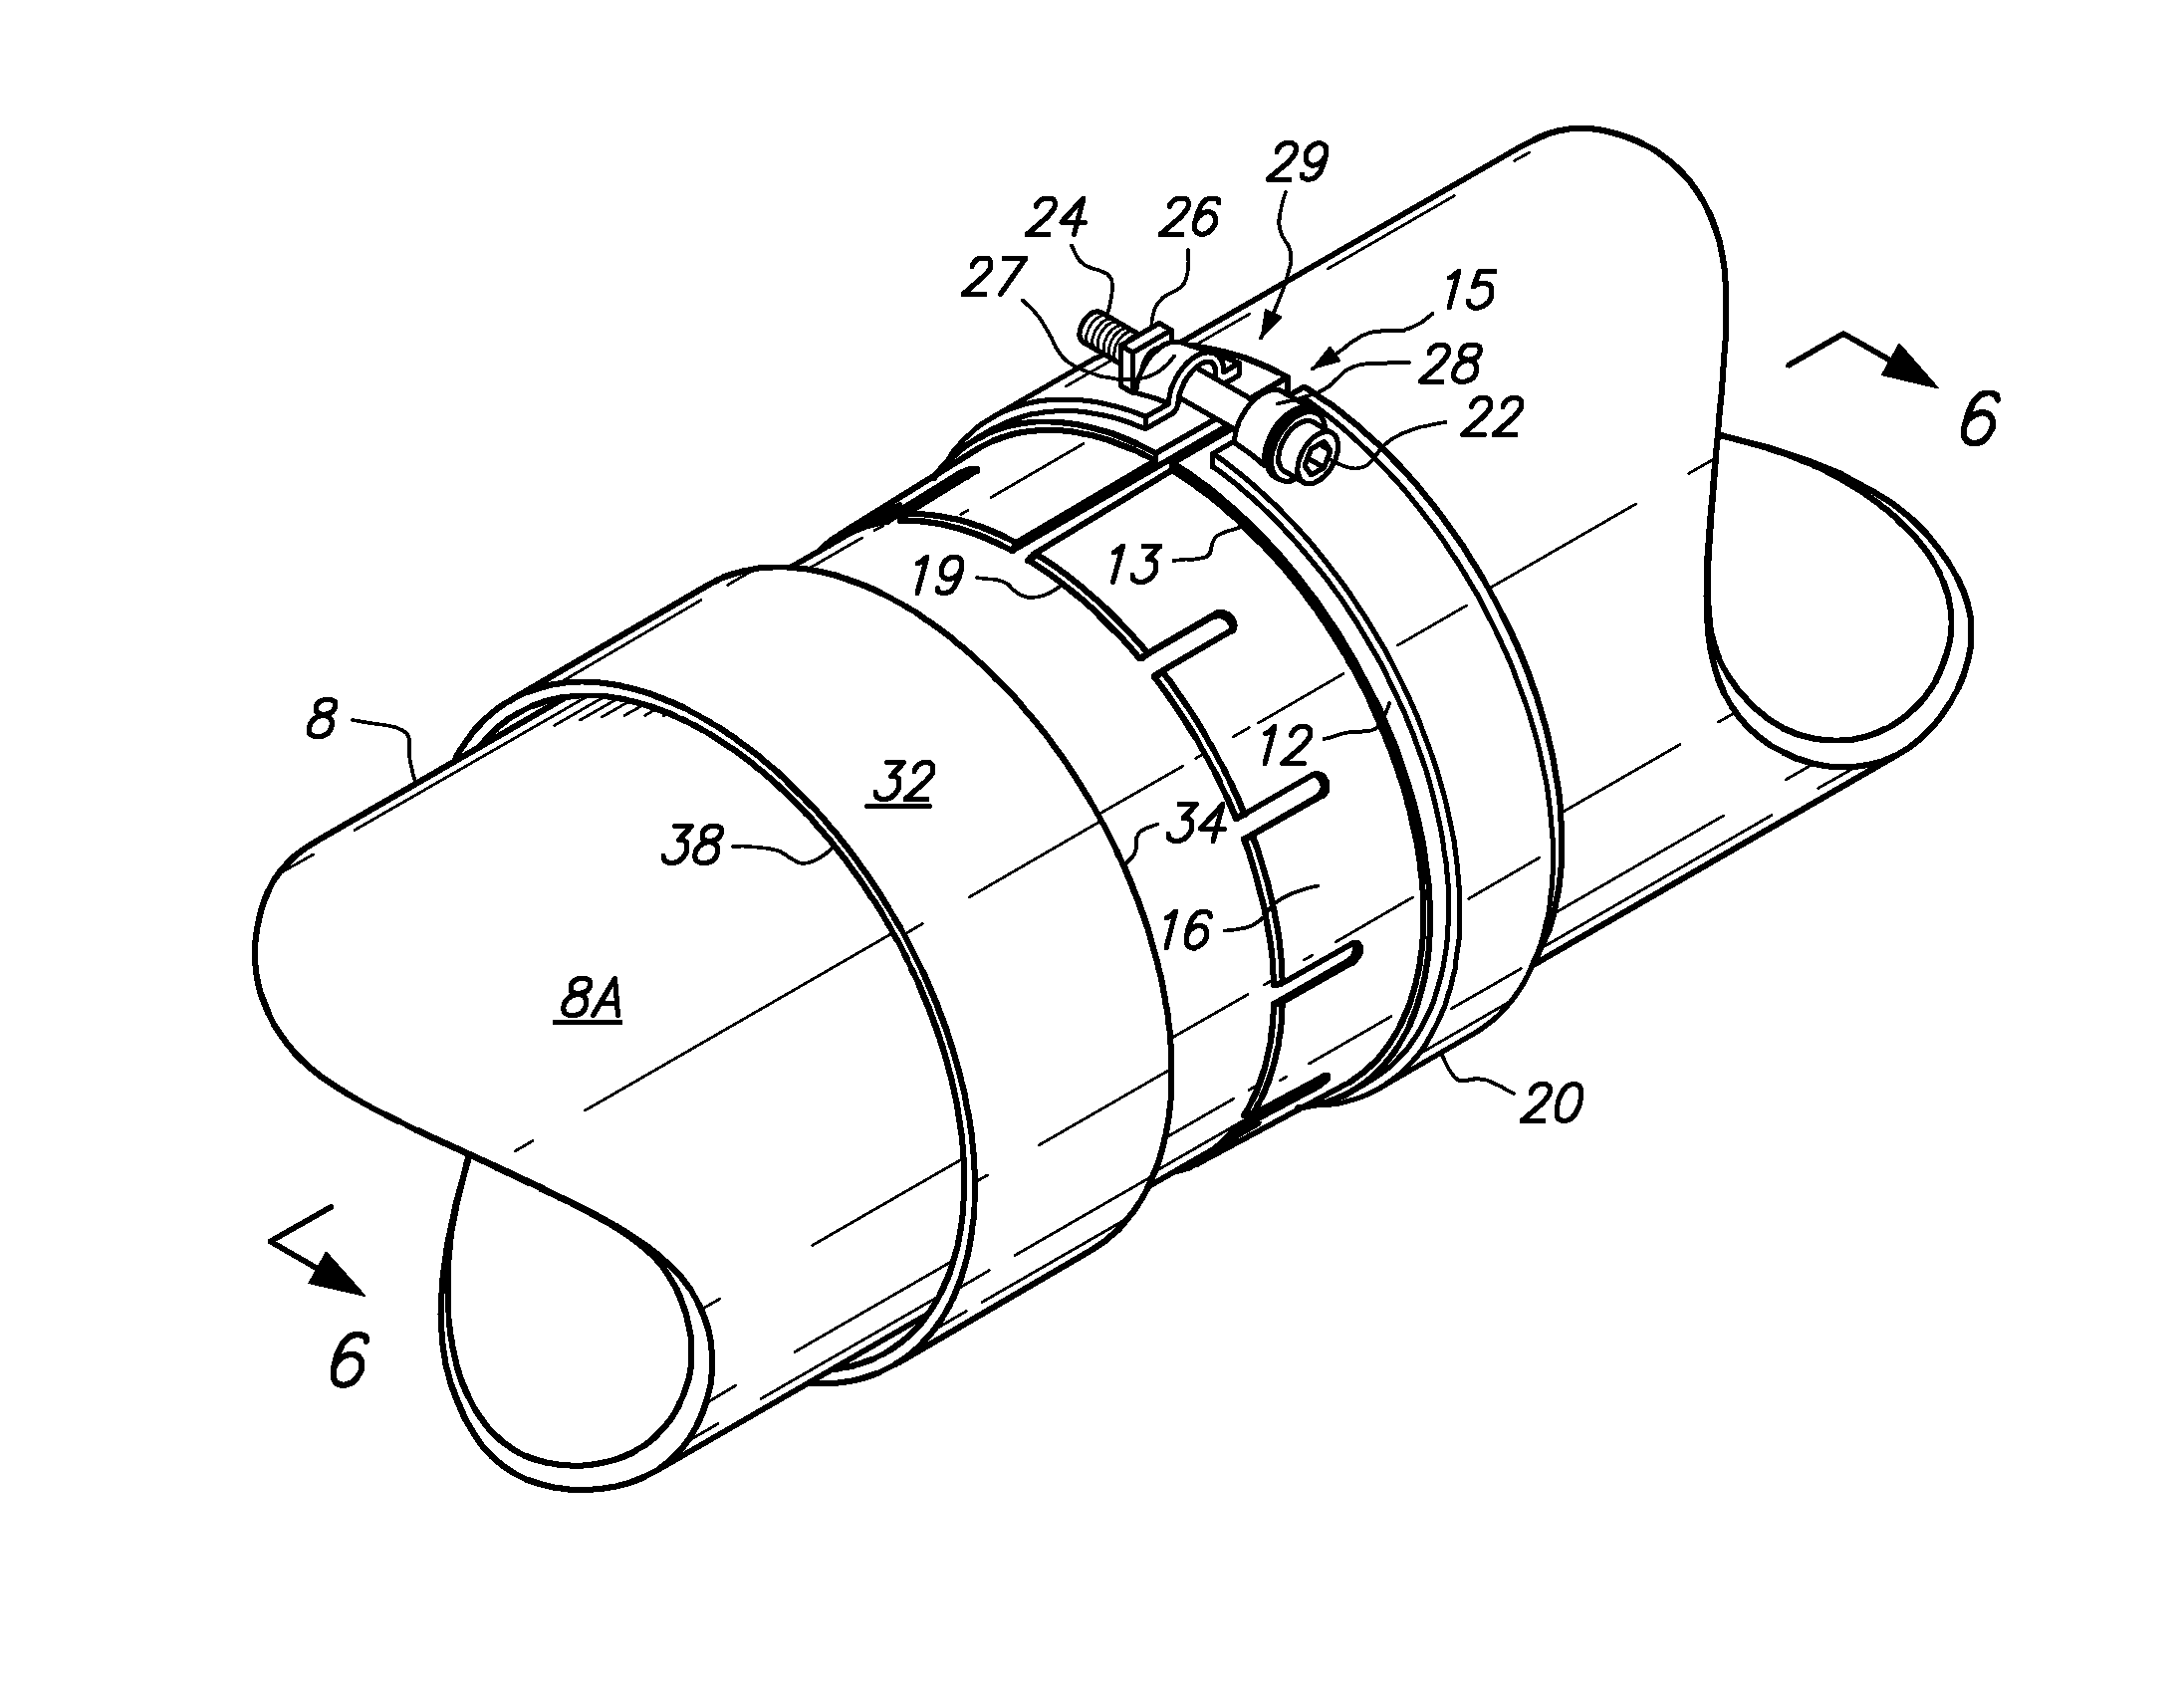 Interference-fit stop collar and method of positioning a device on a tubular